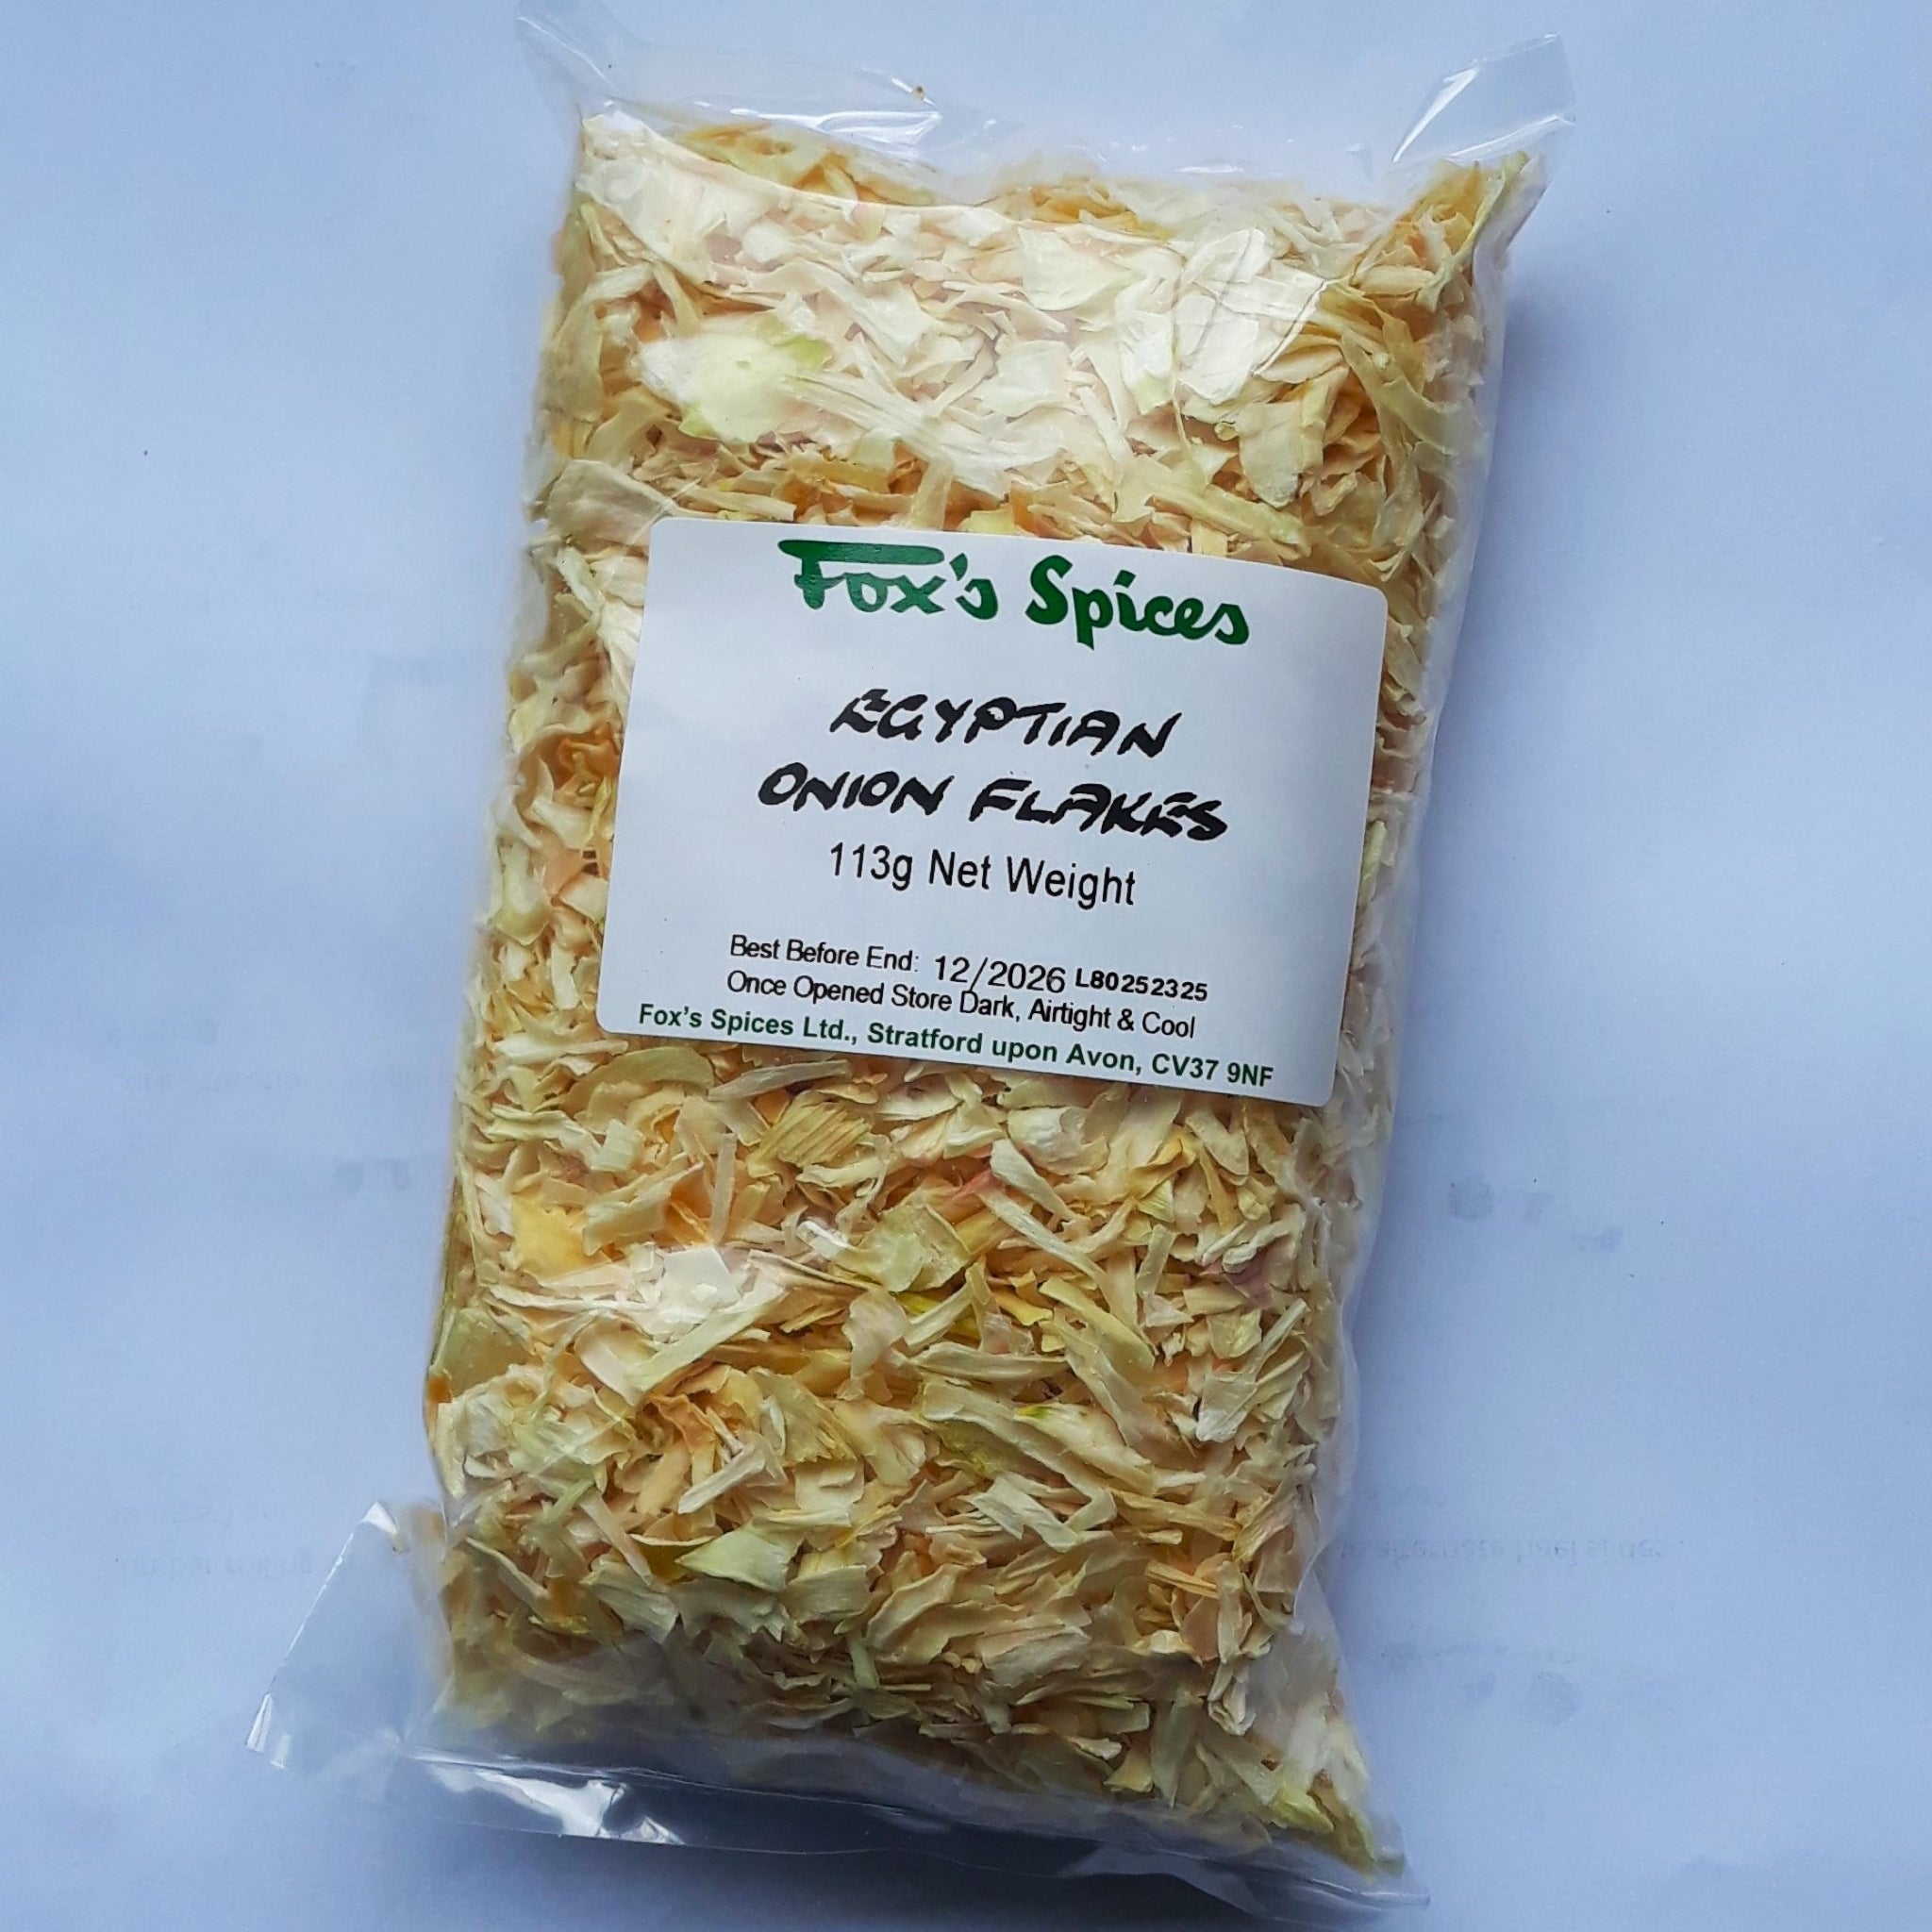 Fox's Spices supplied this 113g bag of onion flakes.